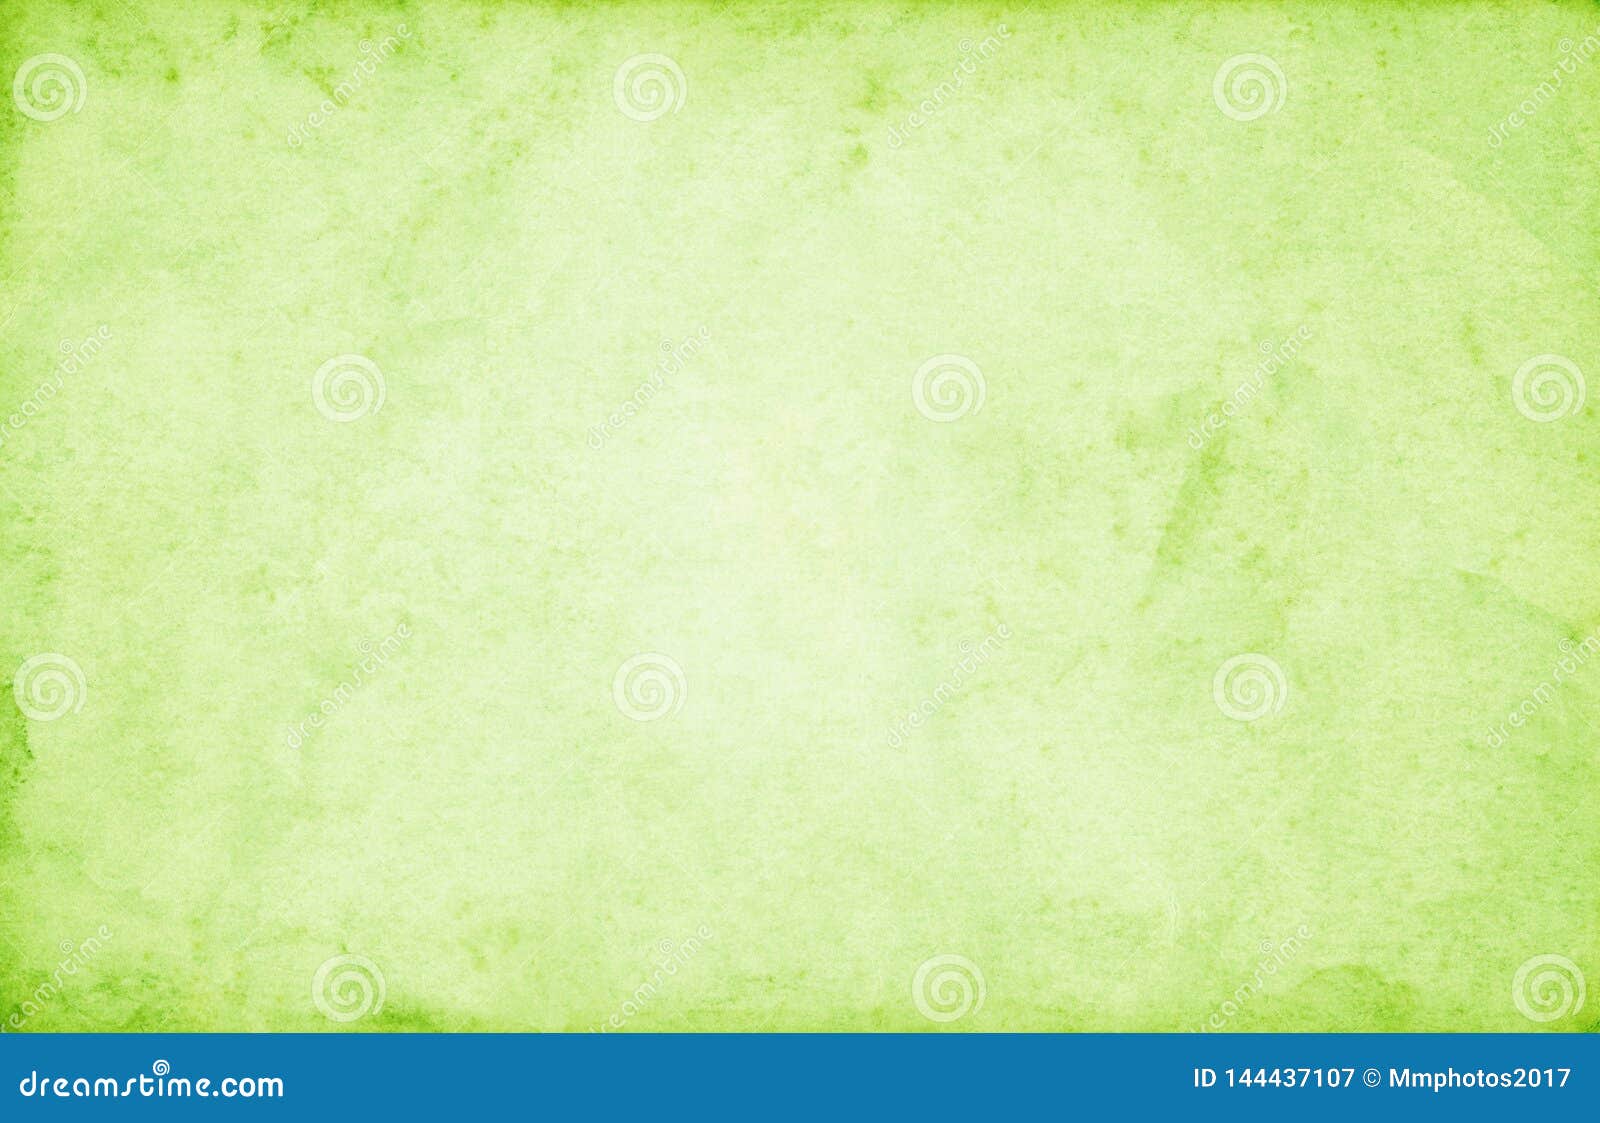 Green Paper Texture Background Stock Illustration - Illustration of fabric,  natural: 144437107